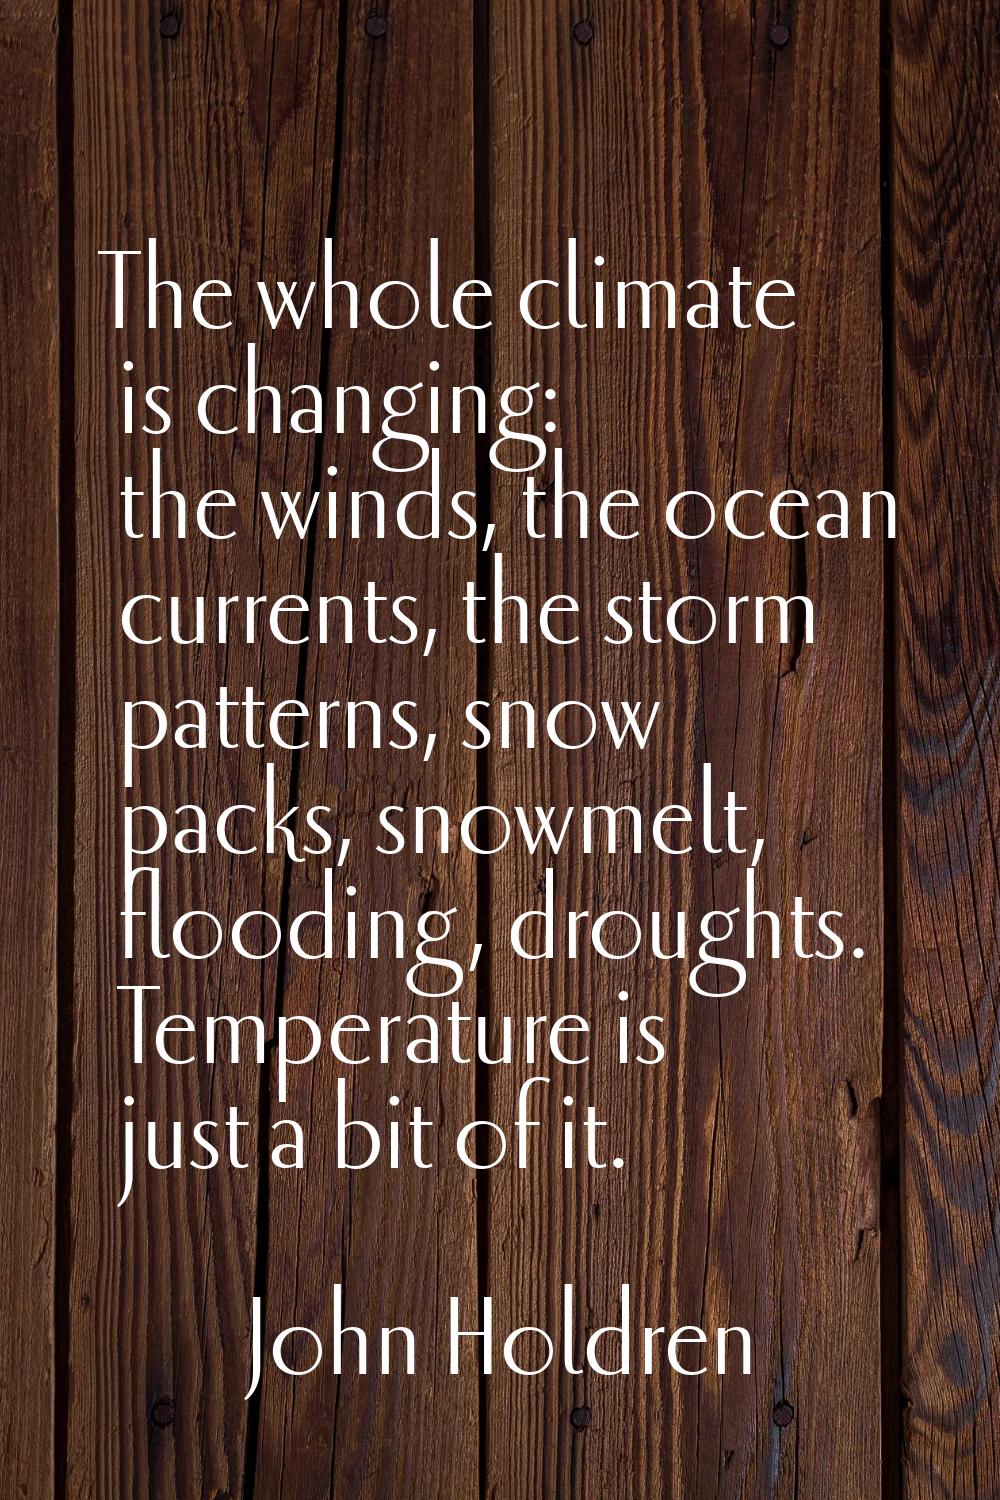 The whole climate is changing: the winds, the ocean currents, the storm patterns, snow packs, snowm